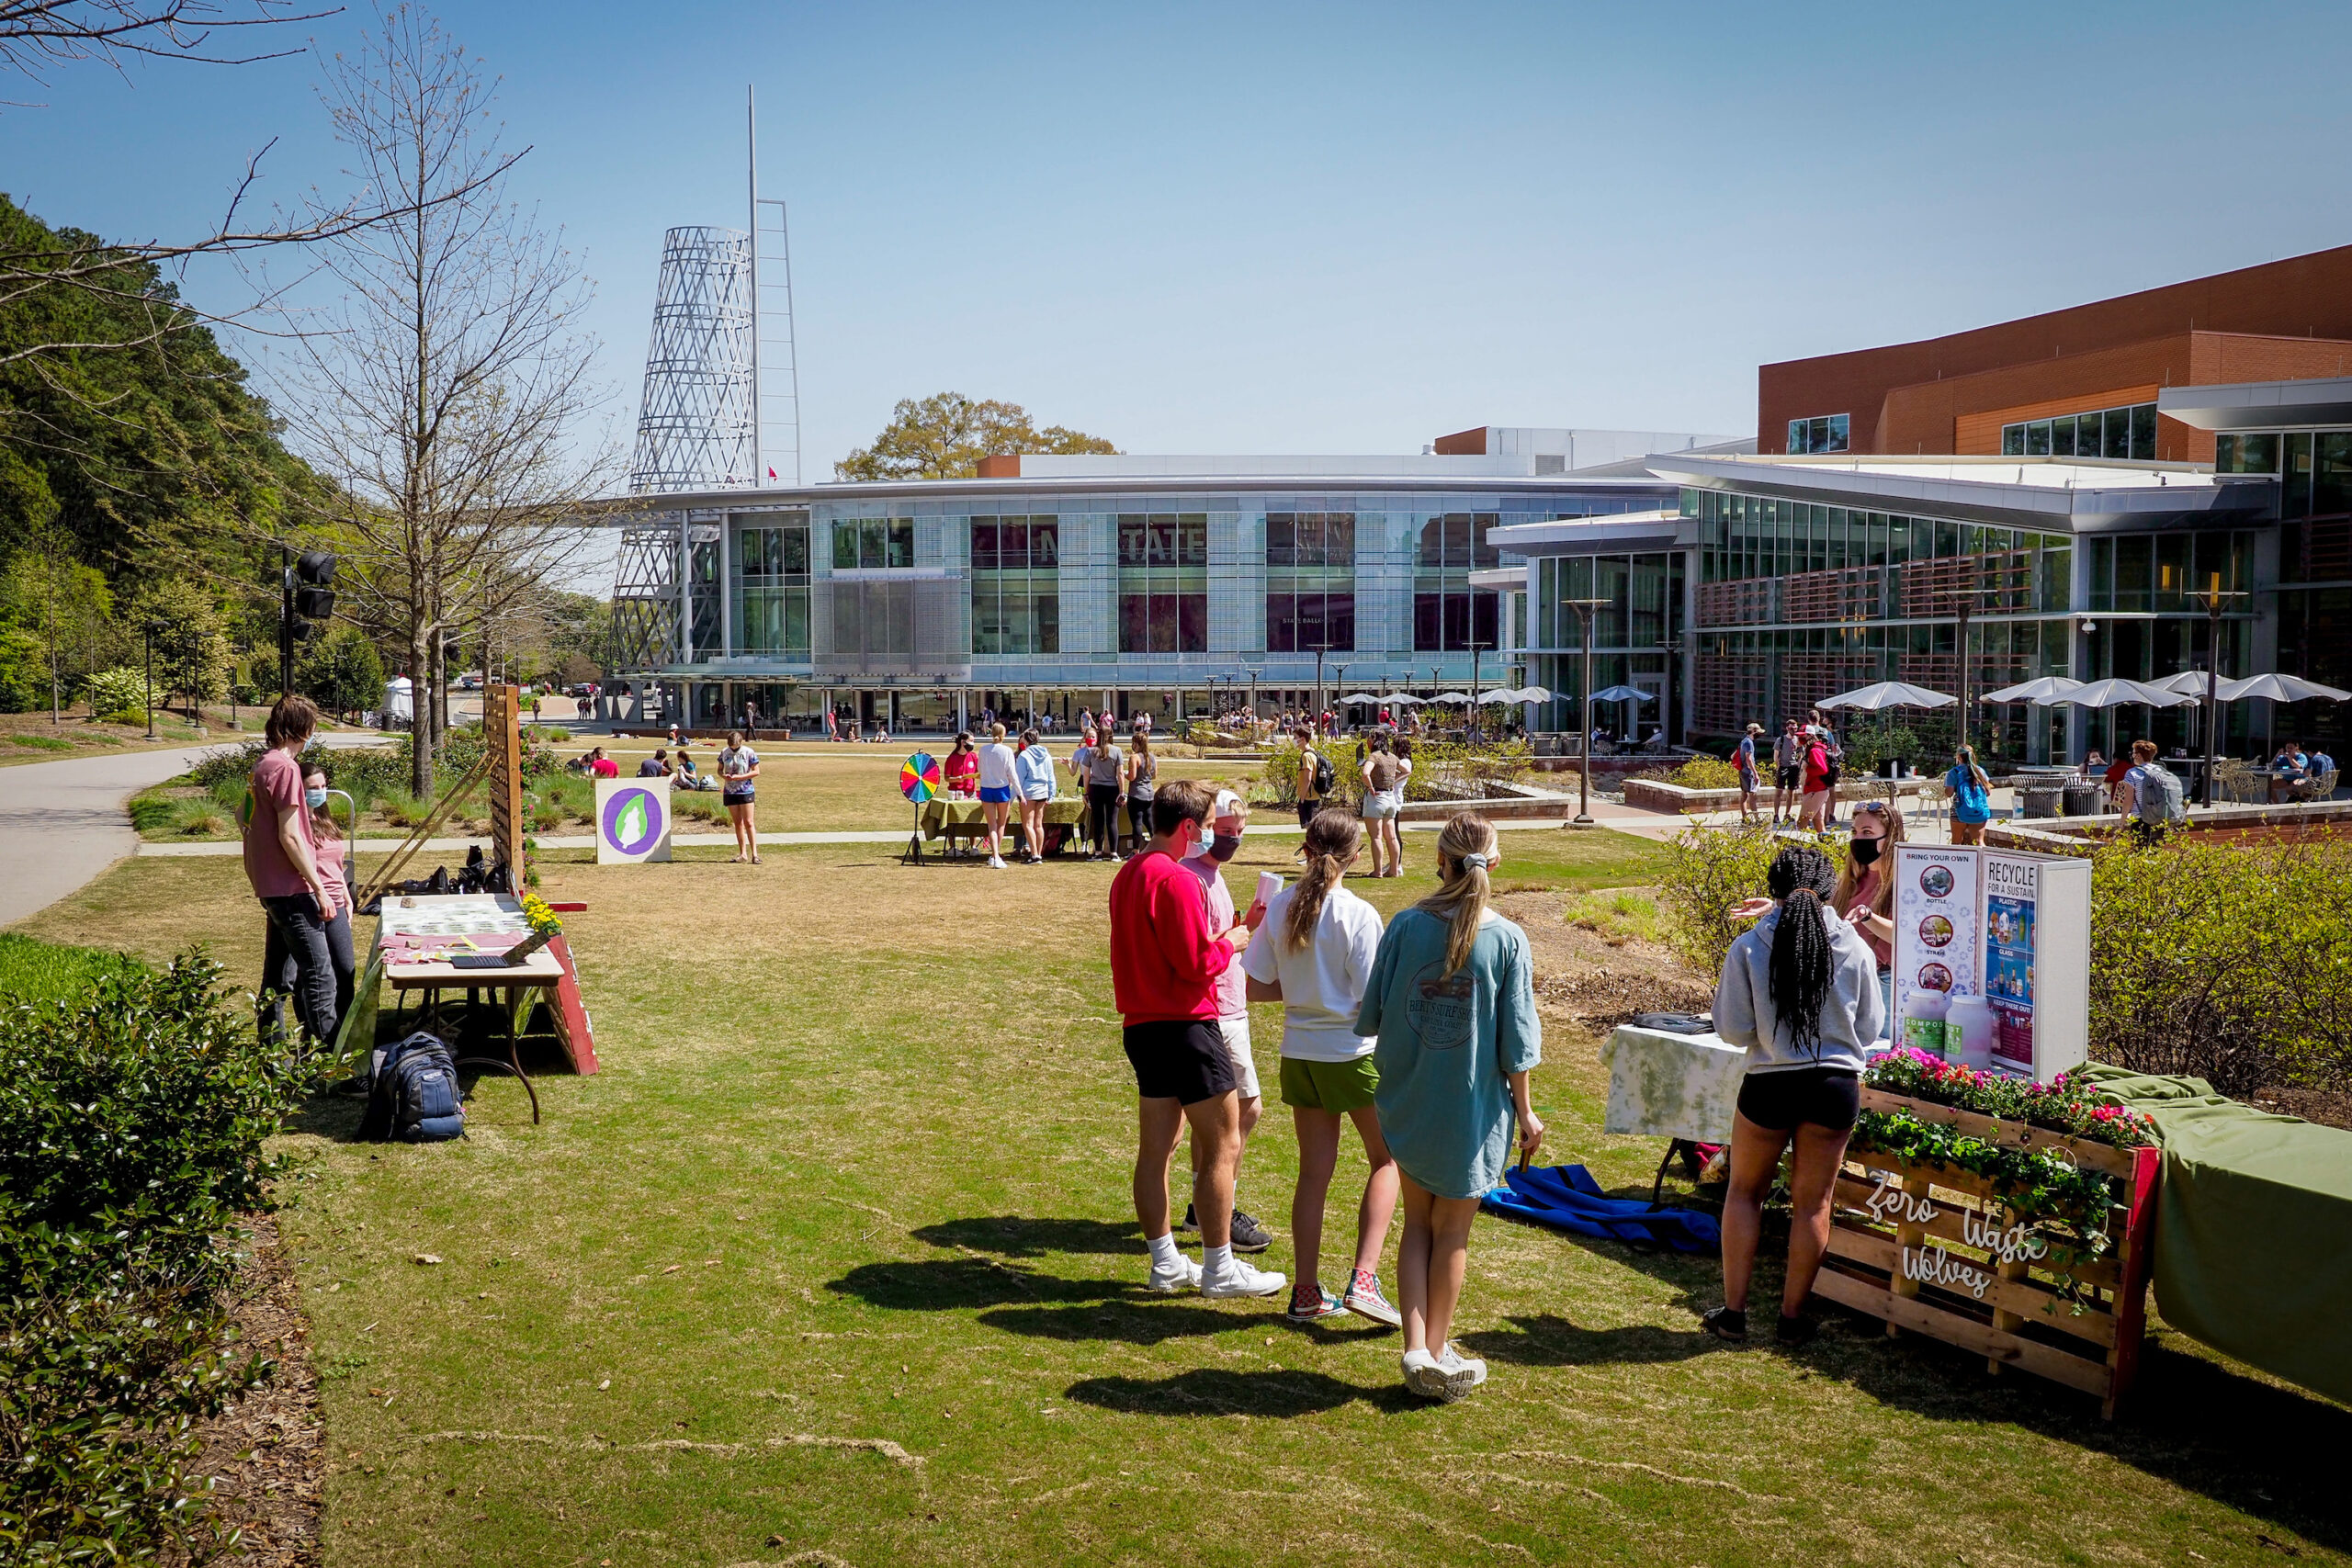 Students take advantage of springtime weather to check out some boothes promoting sustainability on Stafford Commons at the Talley Student Union. Photo by Marc Hall